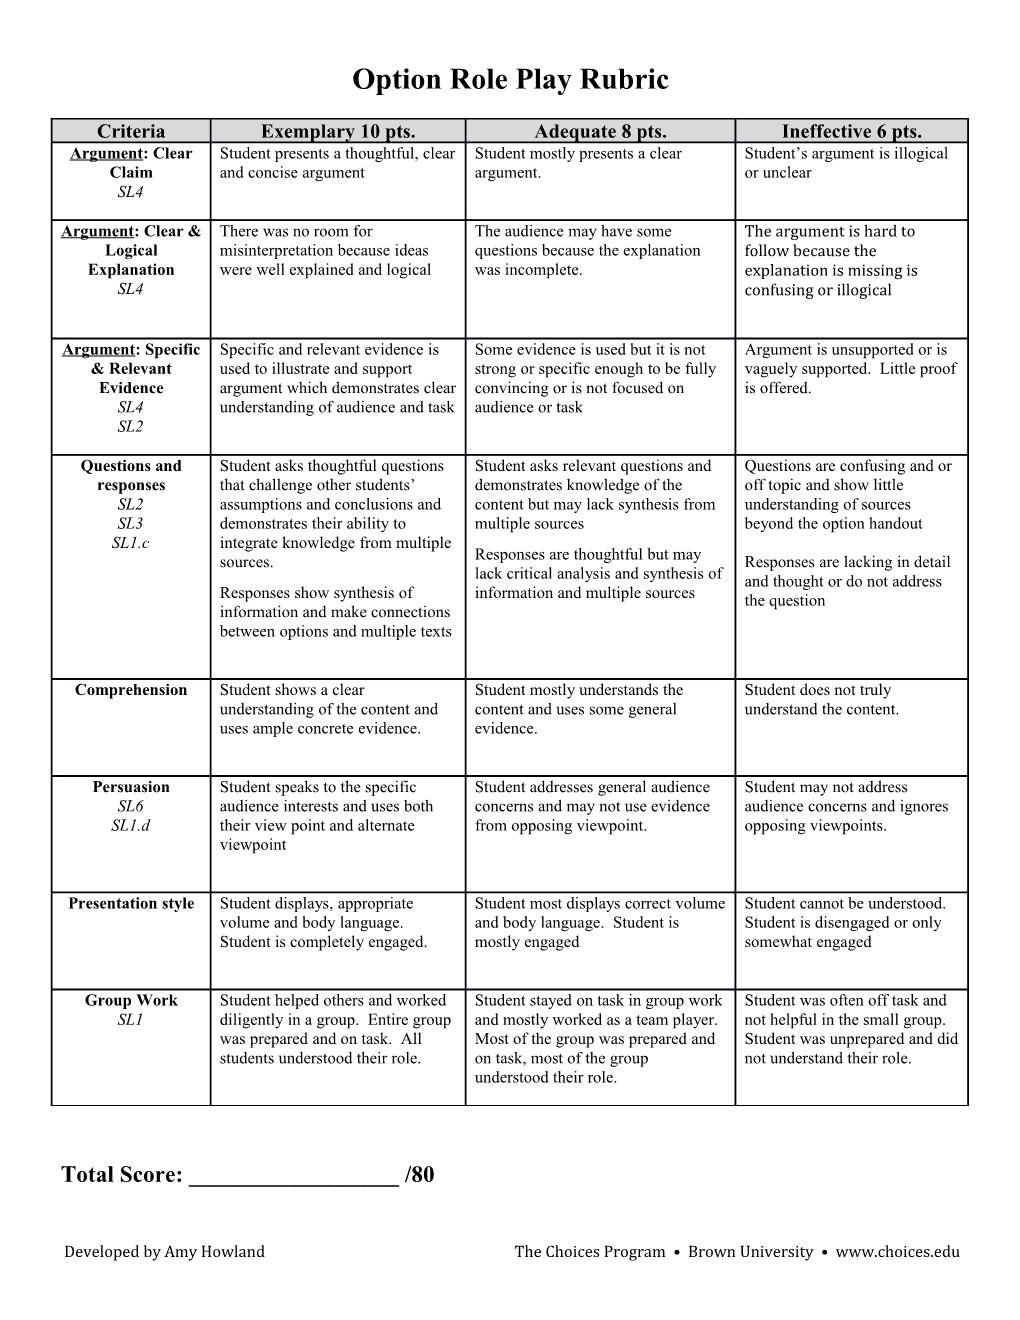 Option Role Play Rubric